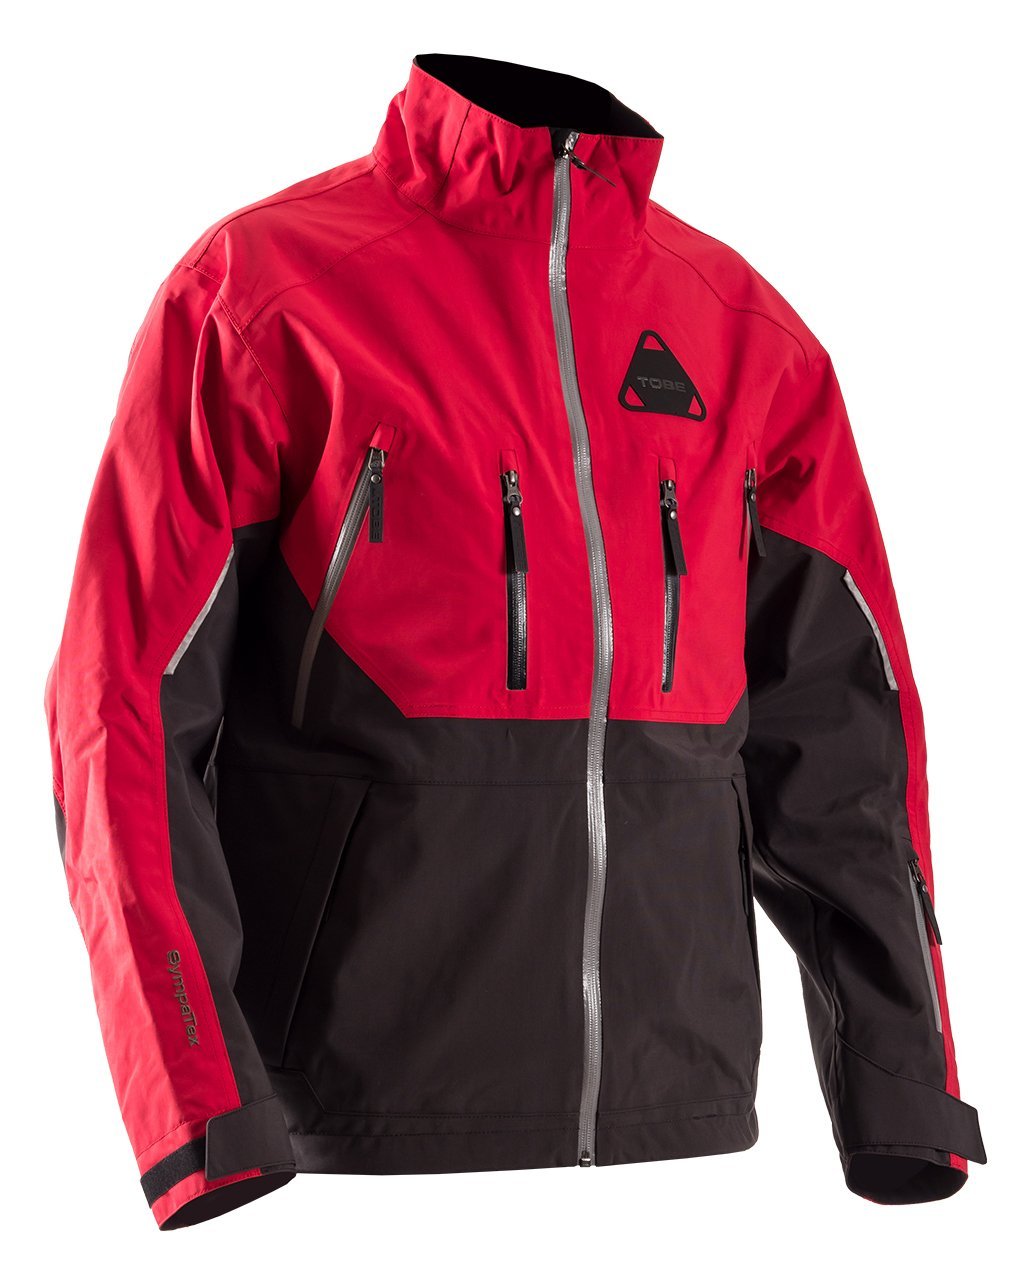 TOBE Iter Jacket - Insulated (Non-Current)